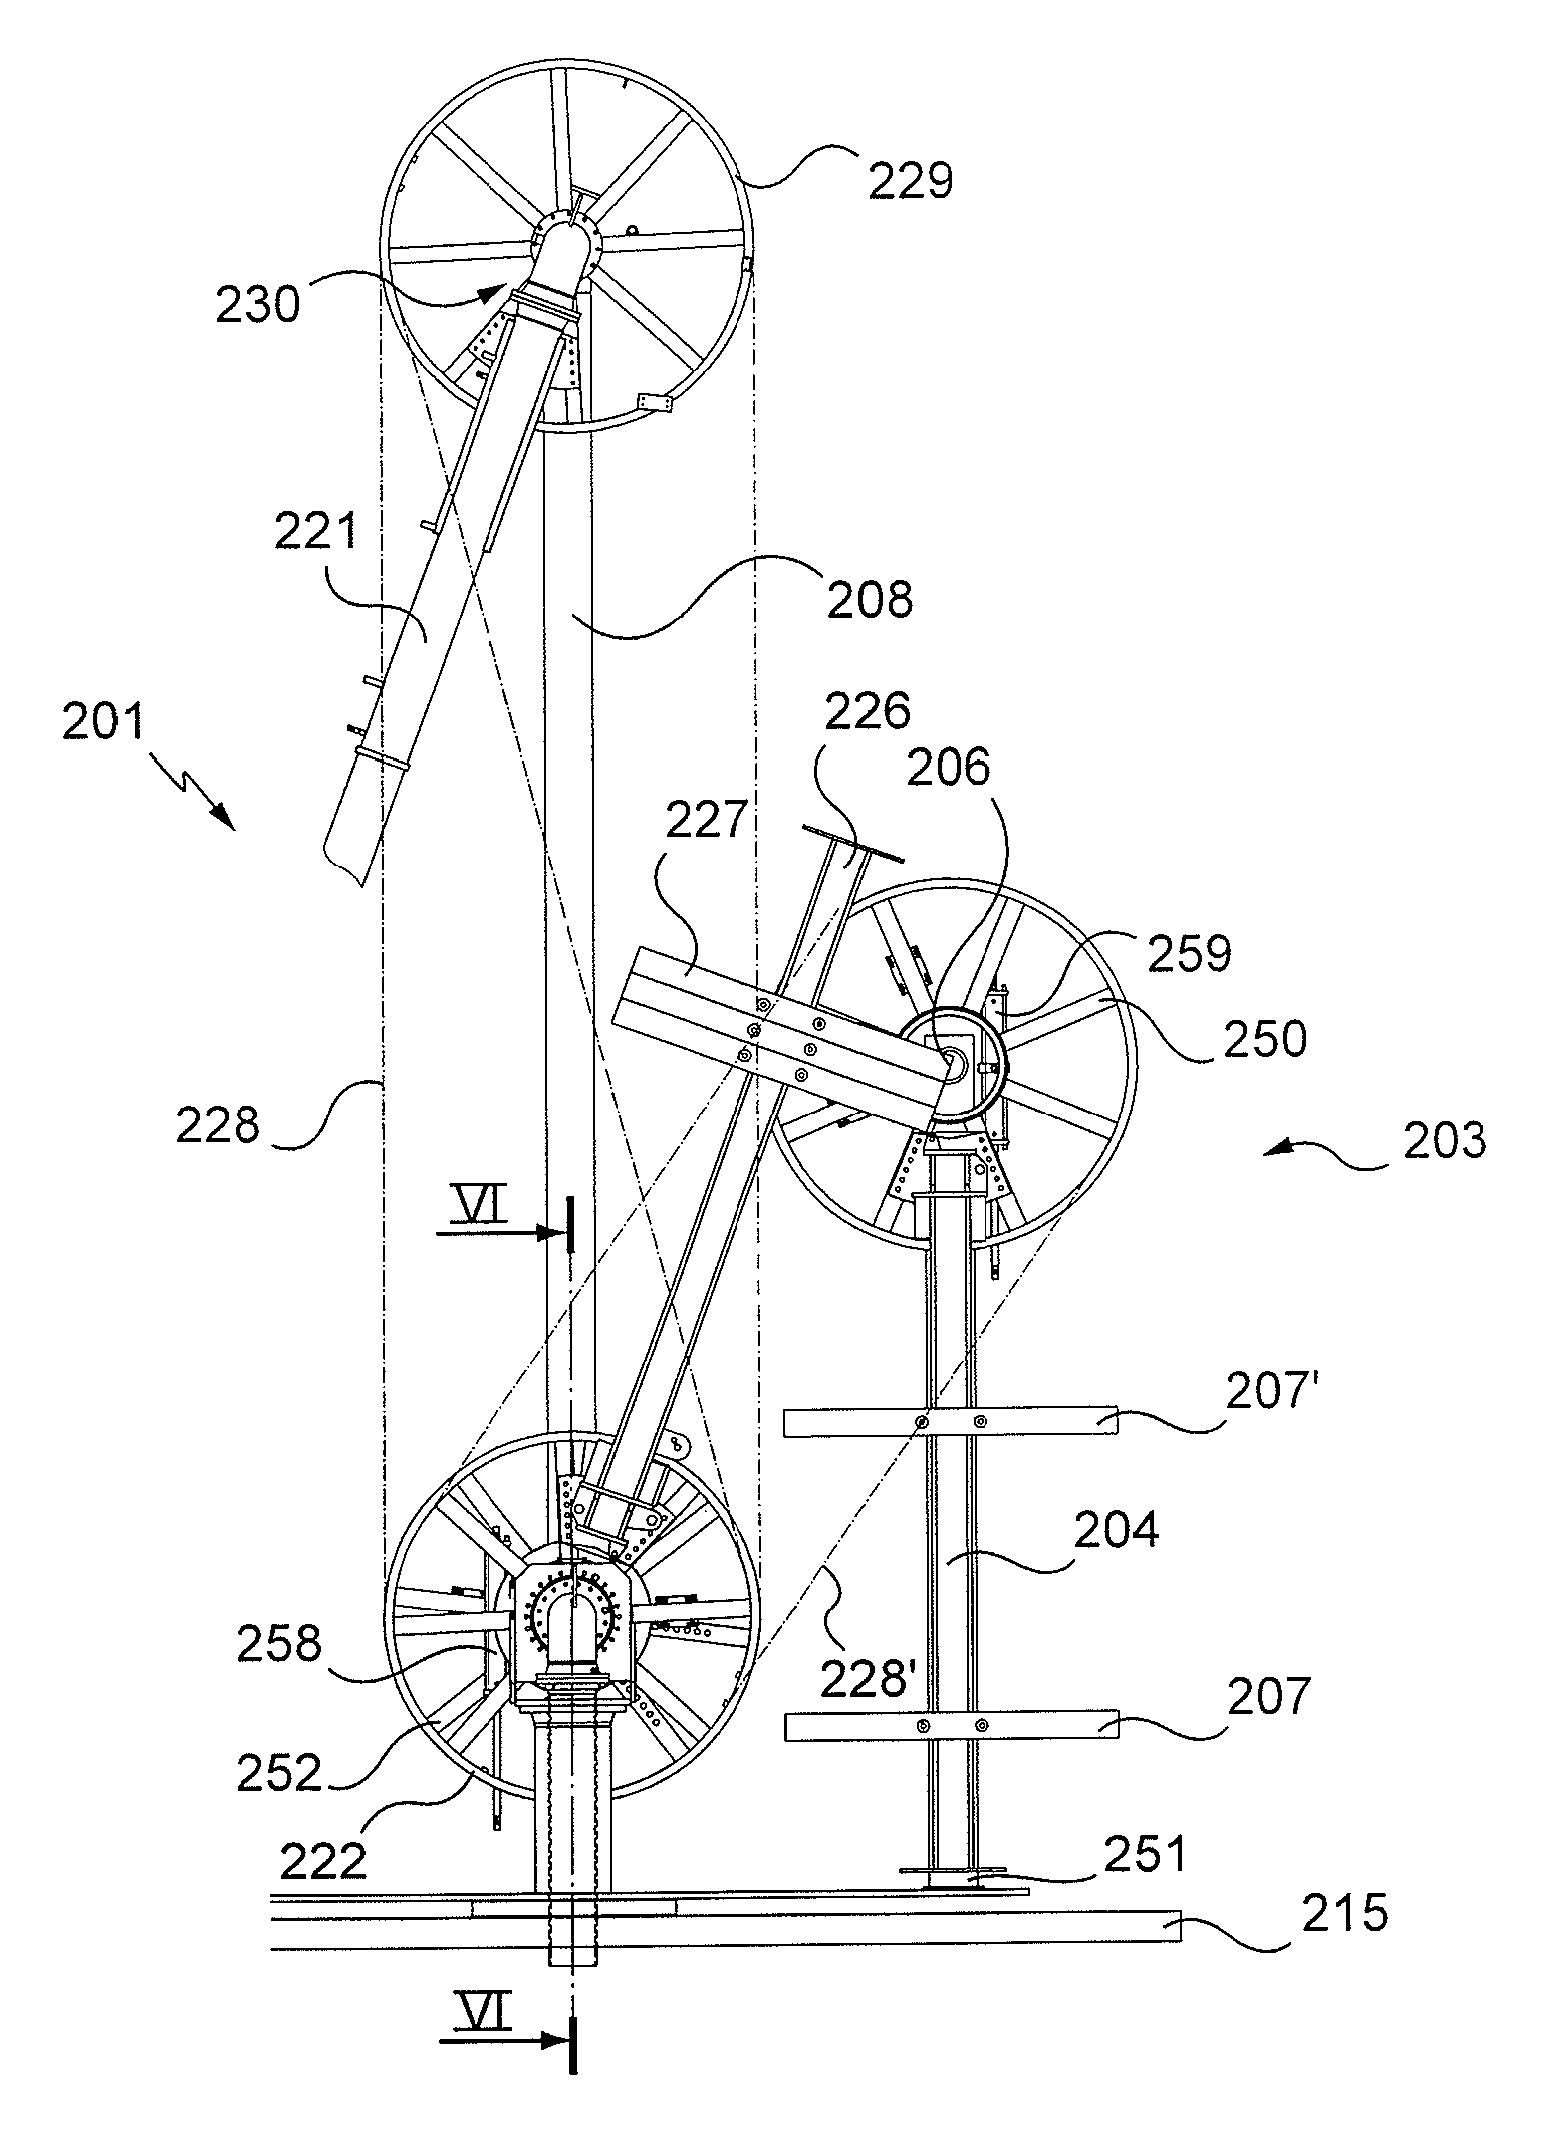 Balanced loading arm without a base for transferring a fluid product